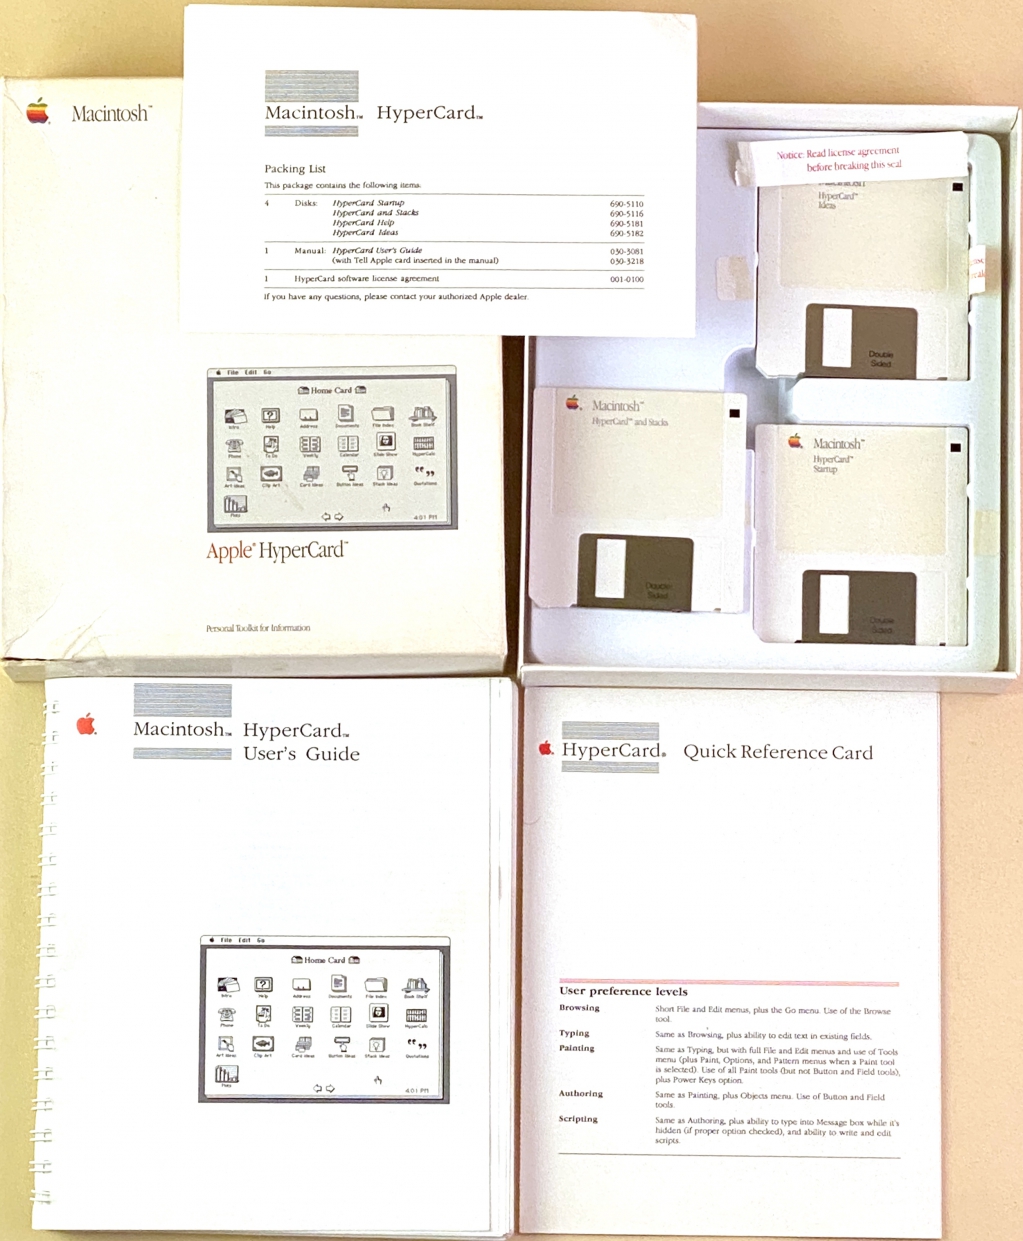 Hypercard 1.0 as it was first sold in August 1987.